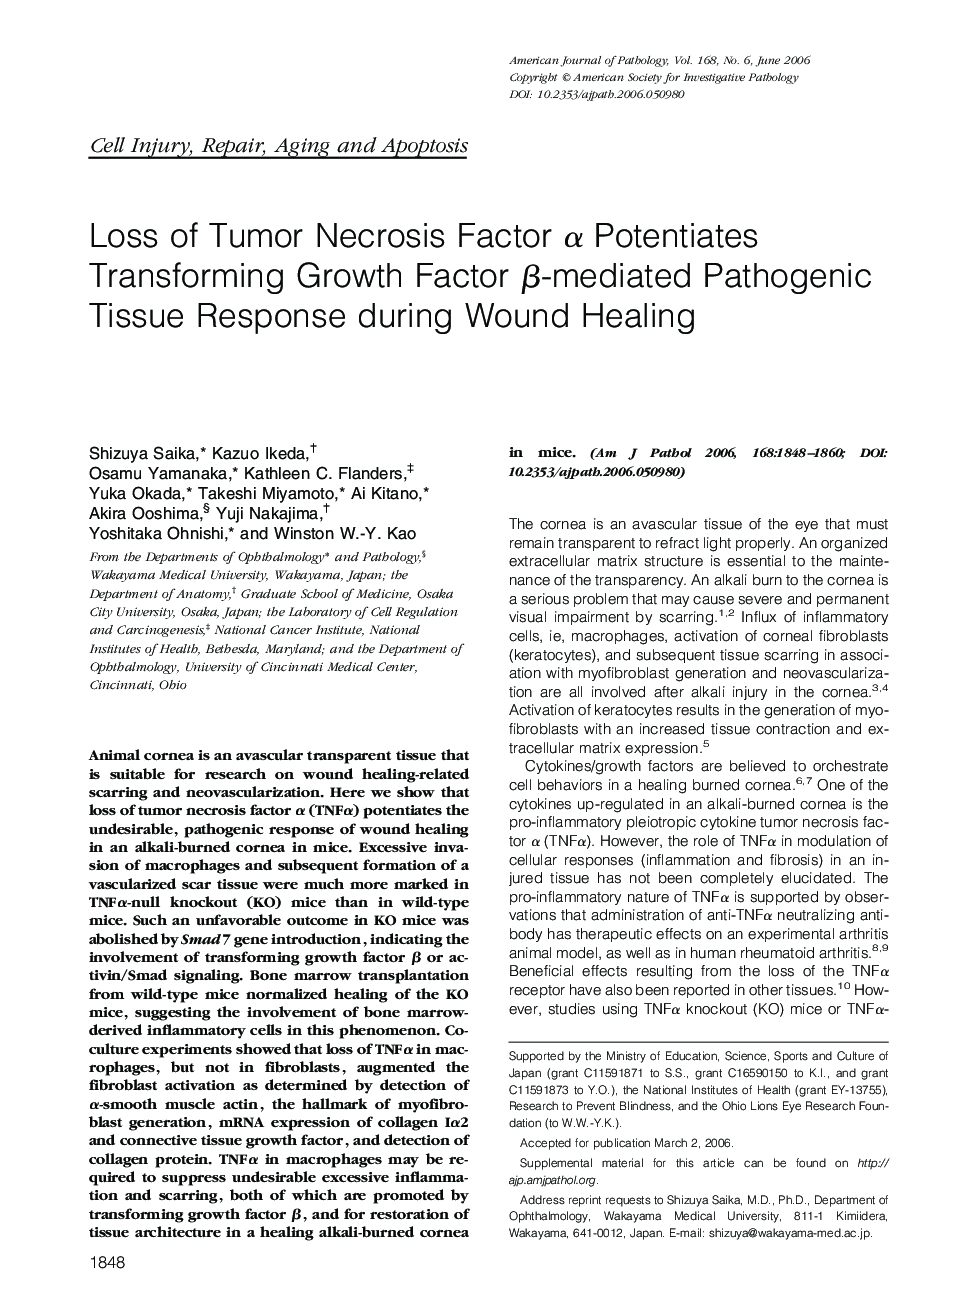 Loss of Tumor Necrosis Factor α Potentiates Transforming Growth Factor β-mediated Pathogenic Tissue Response during Wound Healing 